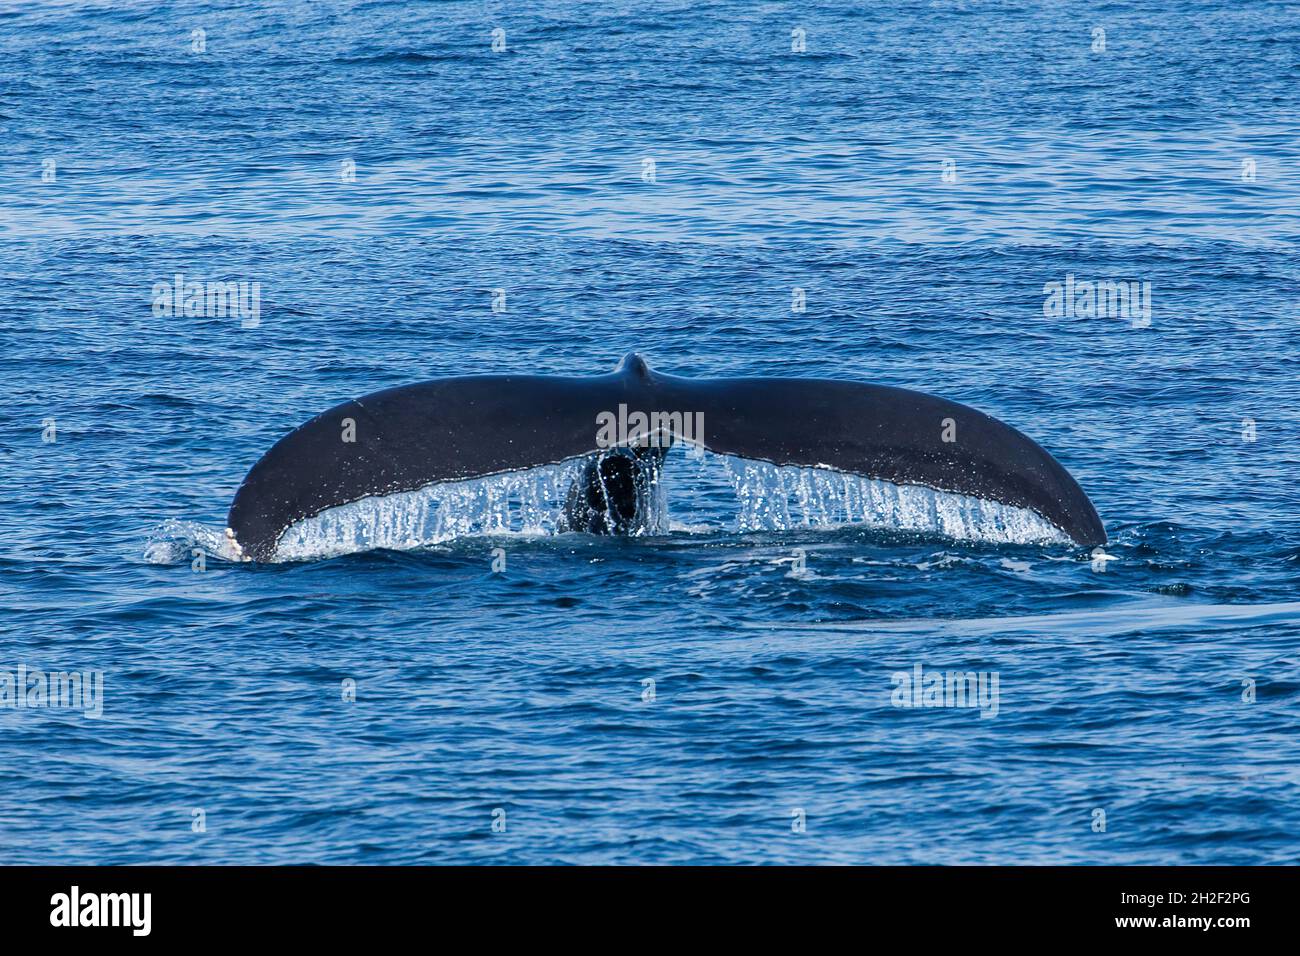 A Humpback Whale lifts its tail while diving in Samana Bay, Dominican Republic. Stock Photo